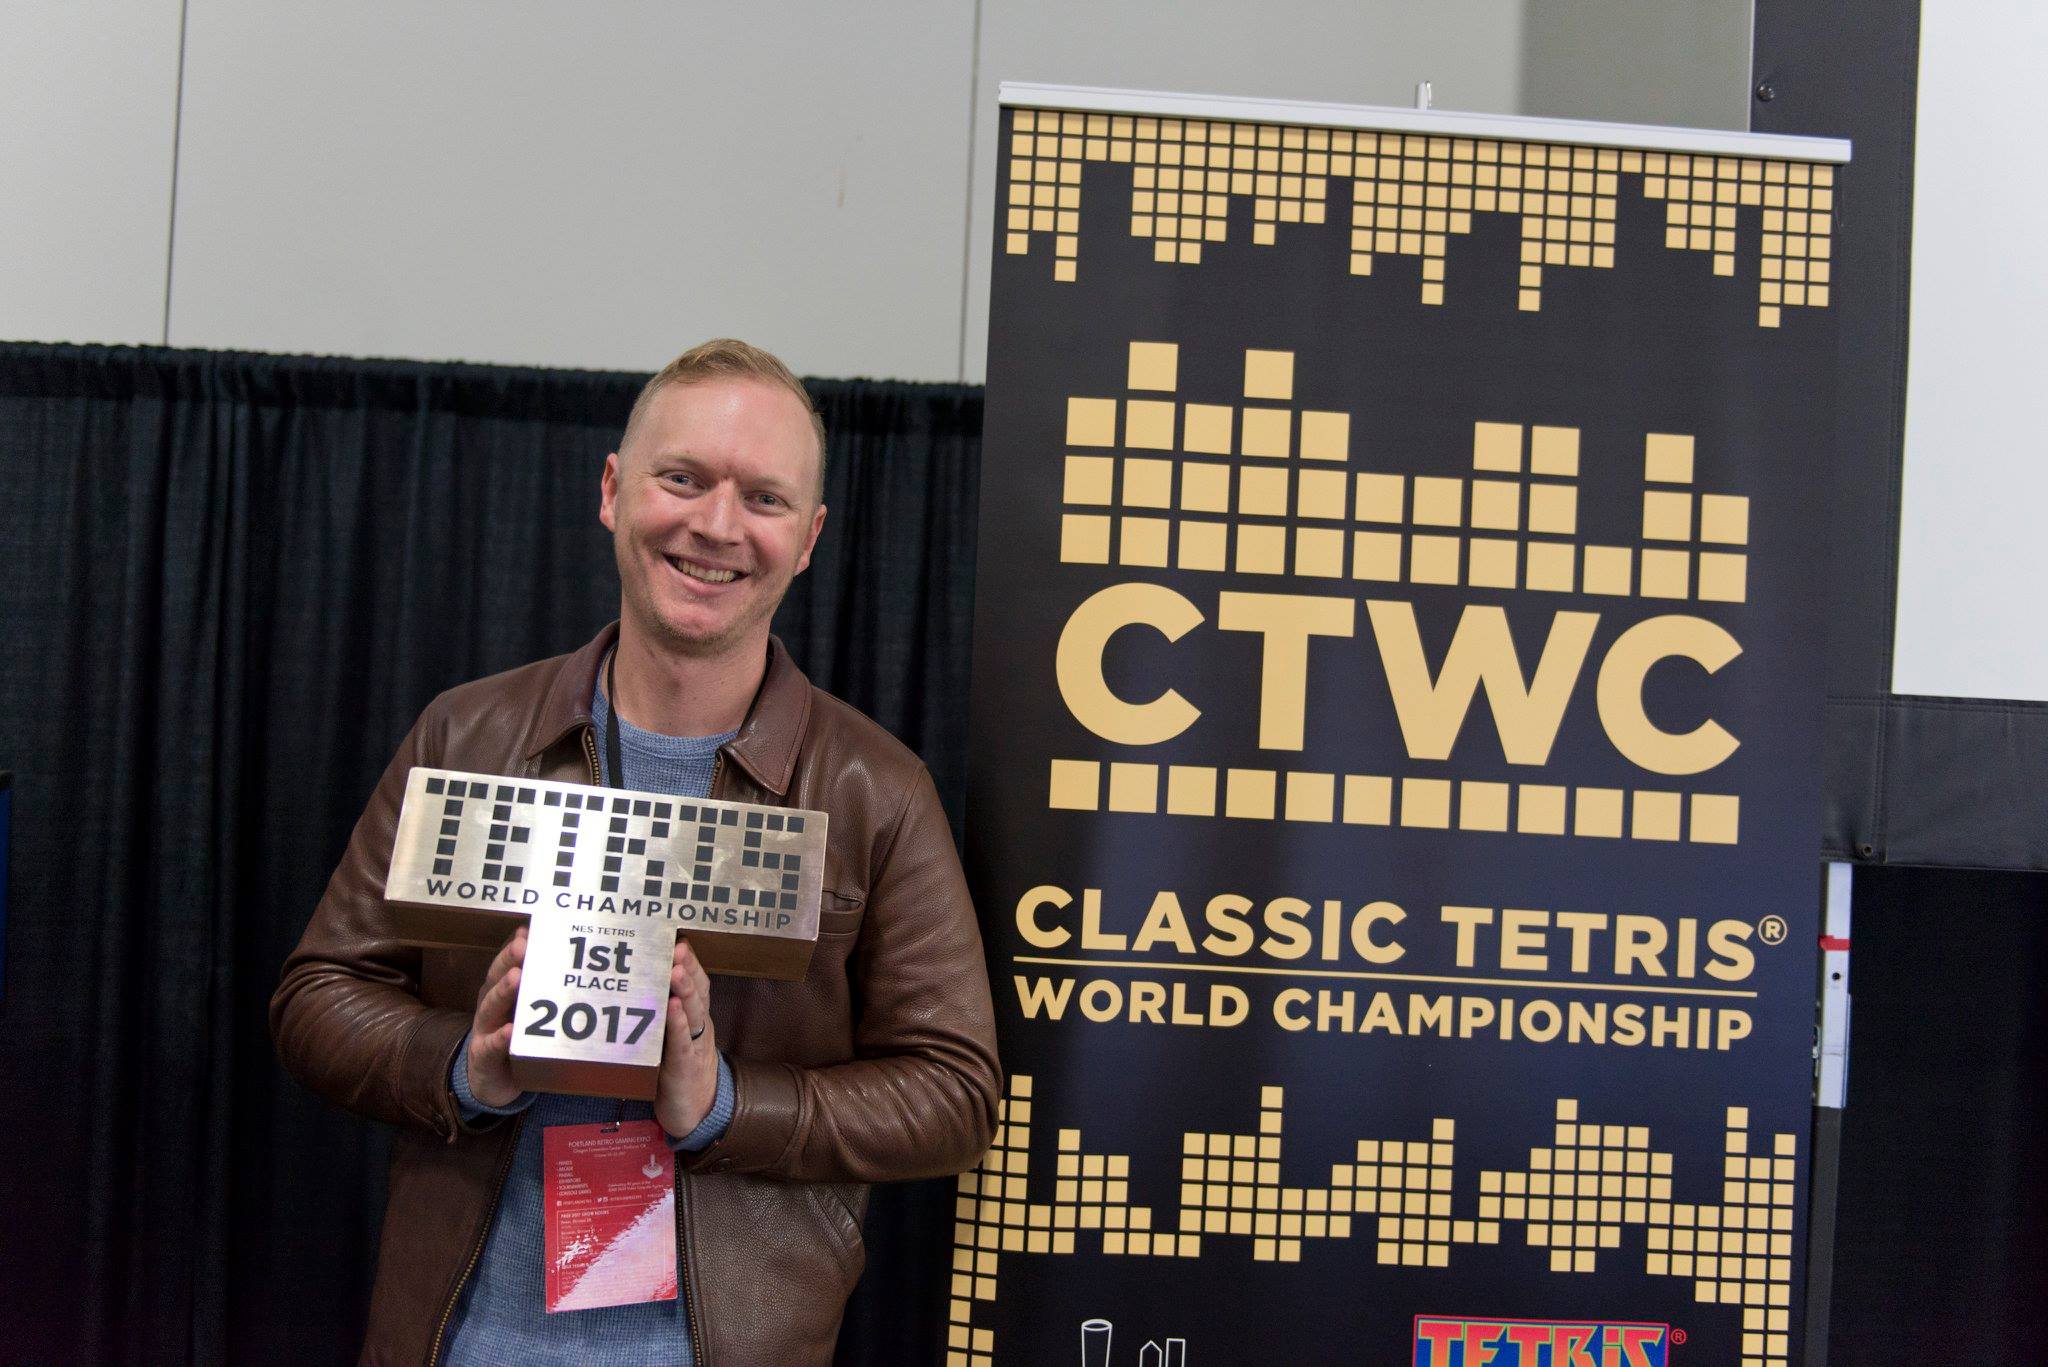 What You Missed During the 2017 Classic Tetris World Championship